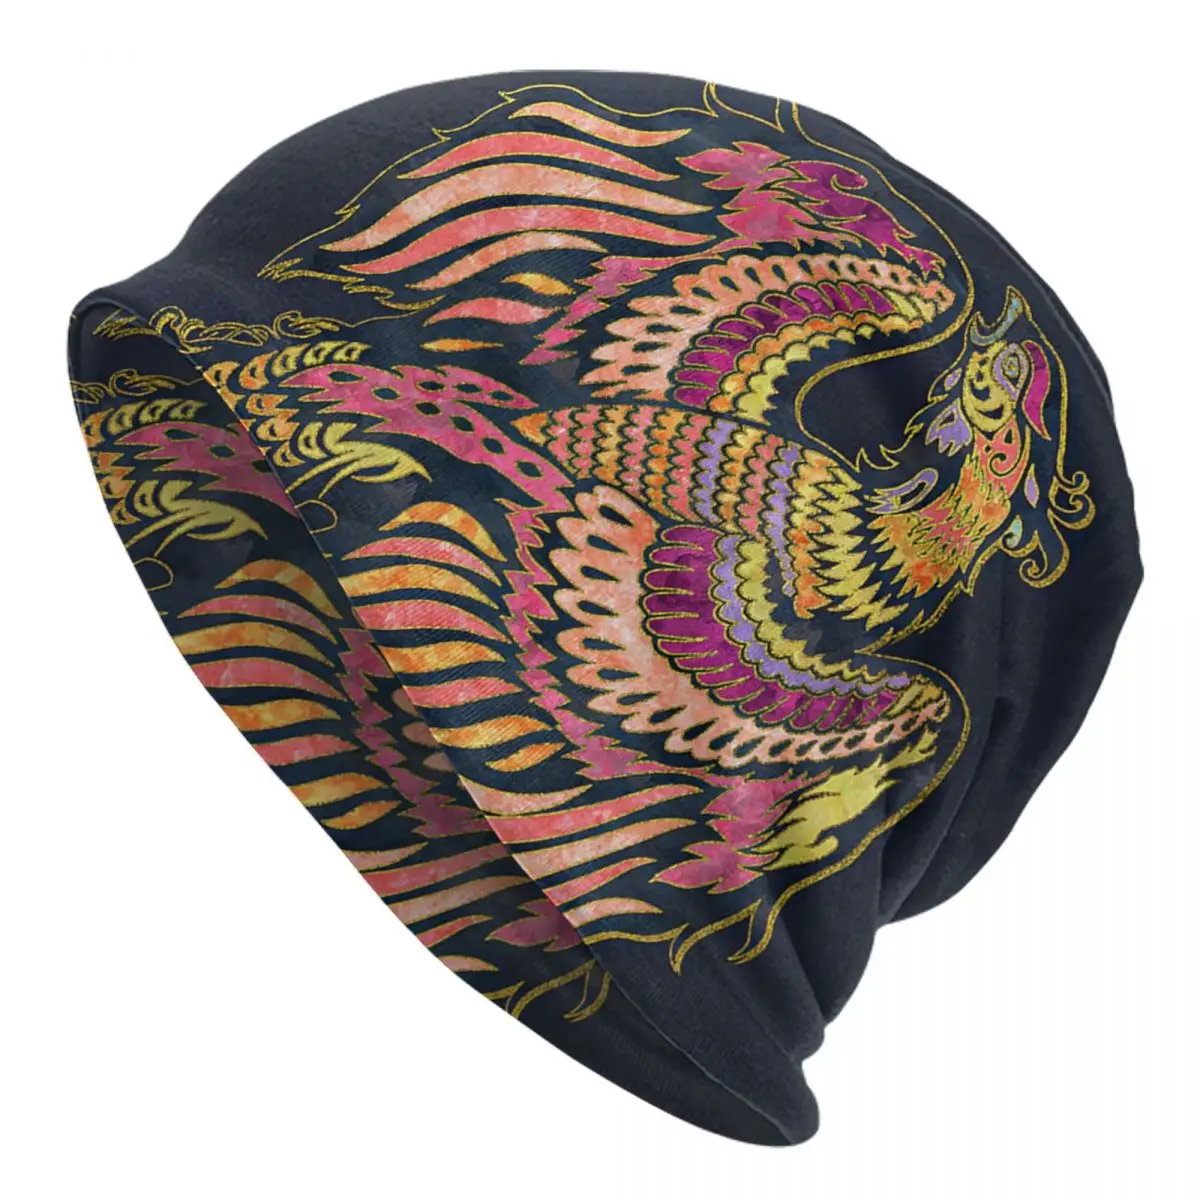 Phoenix Bird Watercolor And Gold Adult Men's Women's Knit Hat Keep warm winter knitted hat